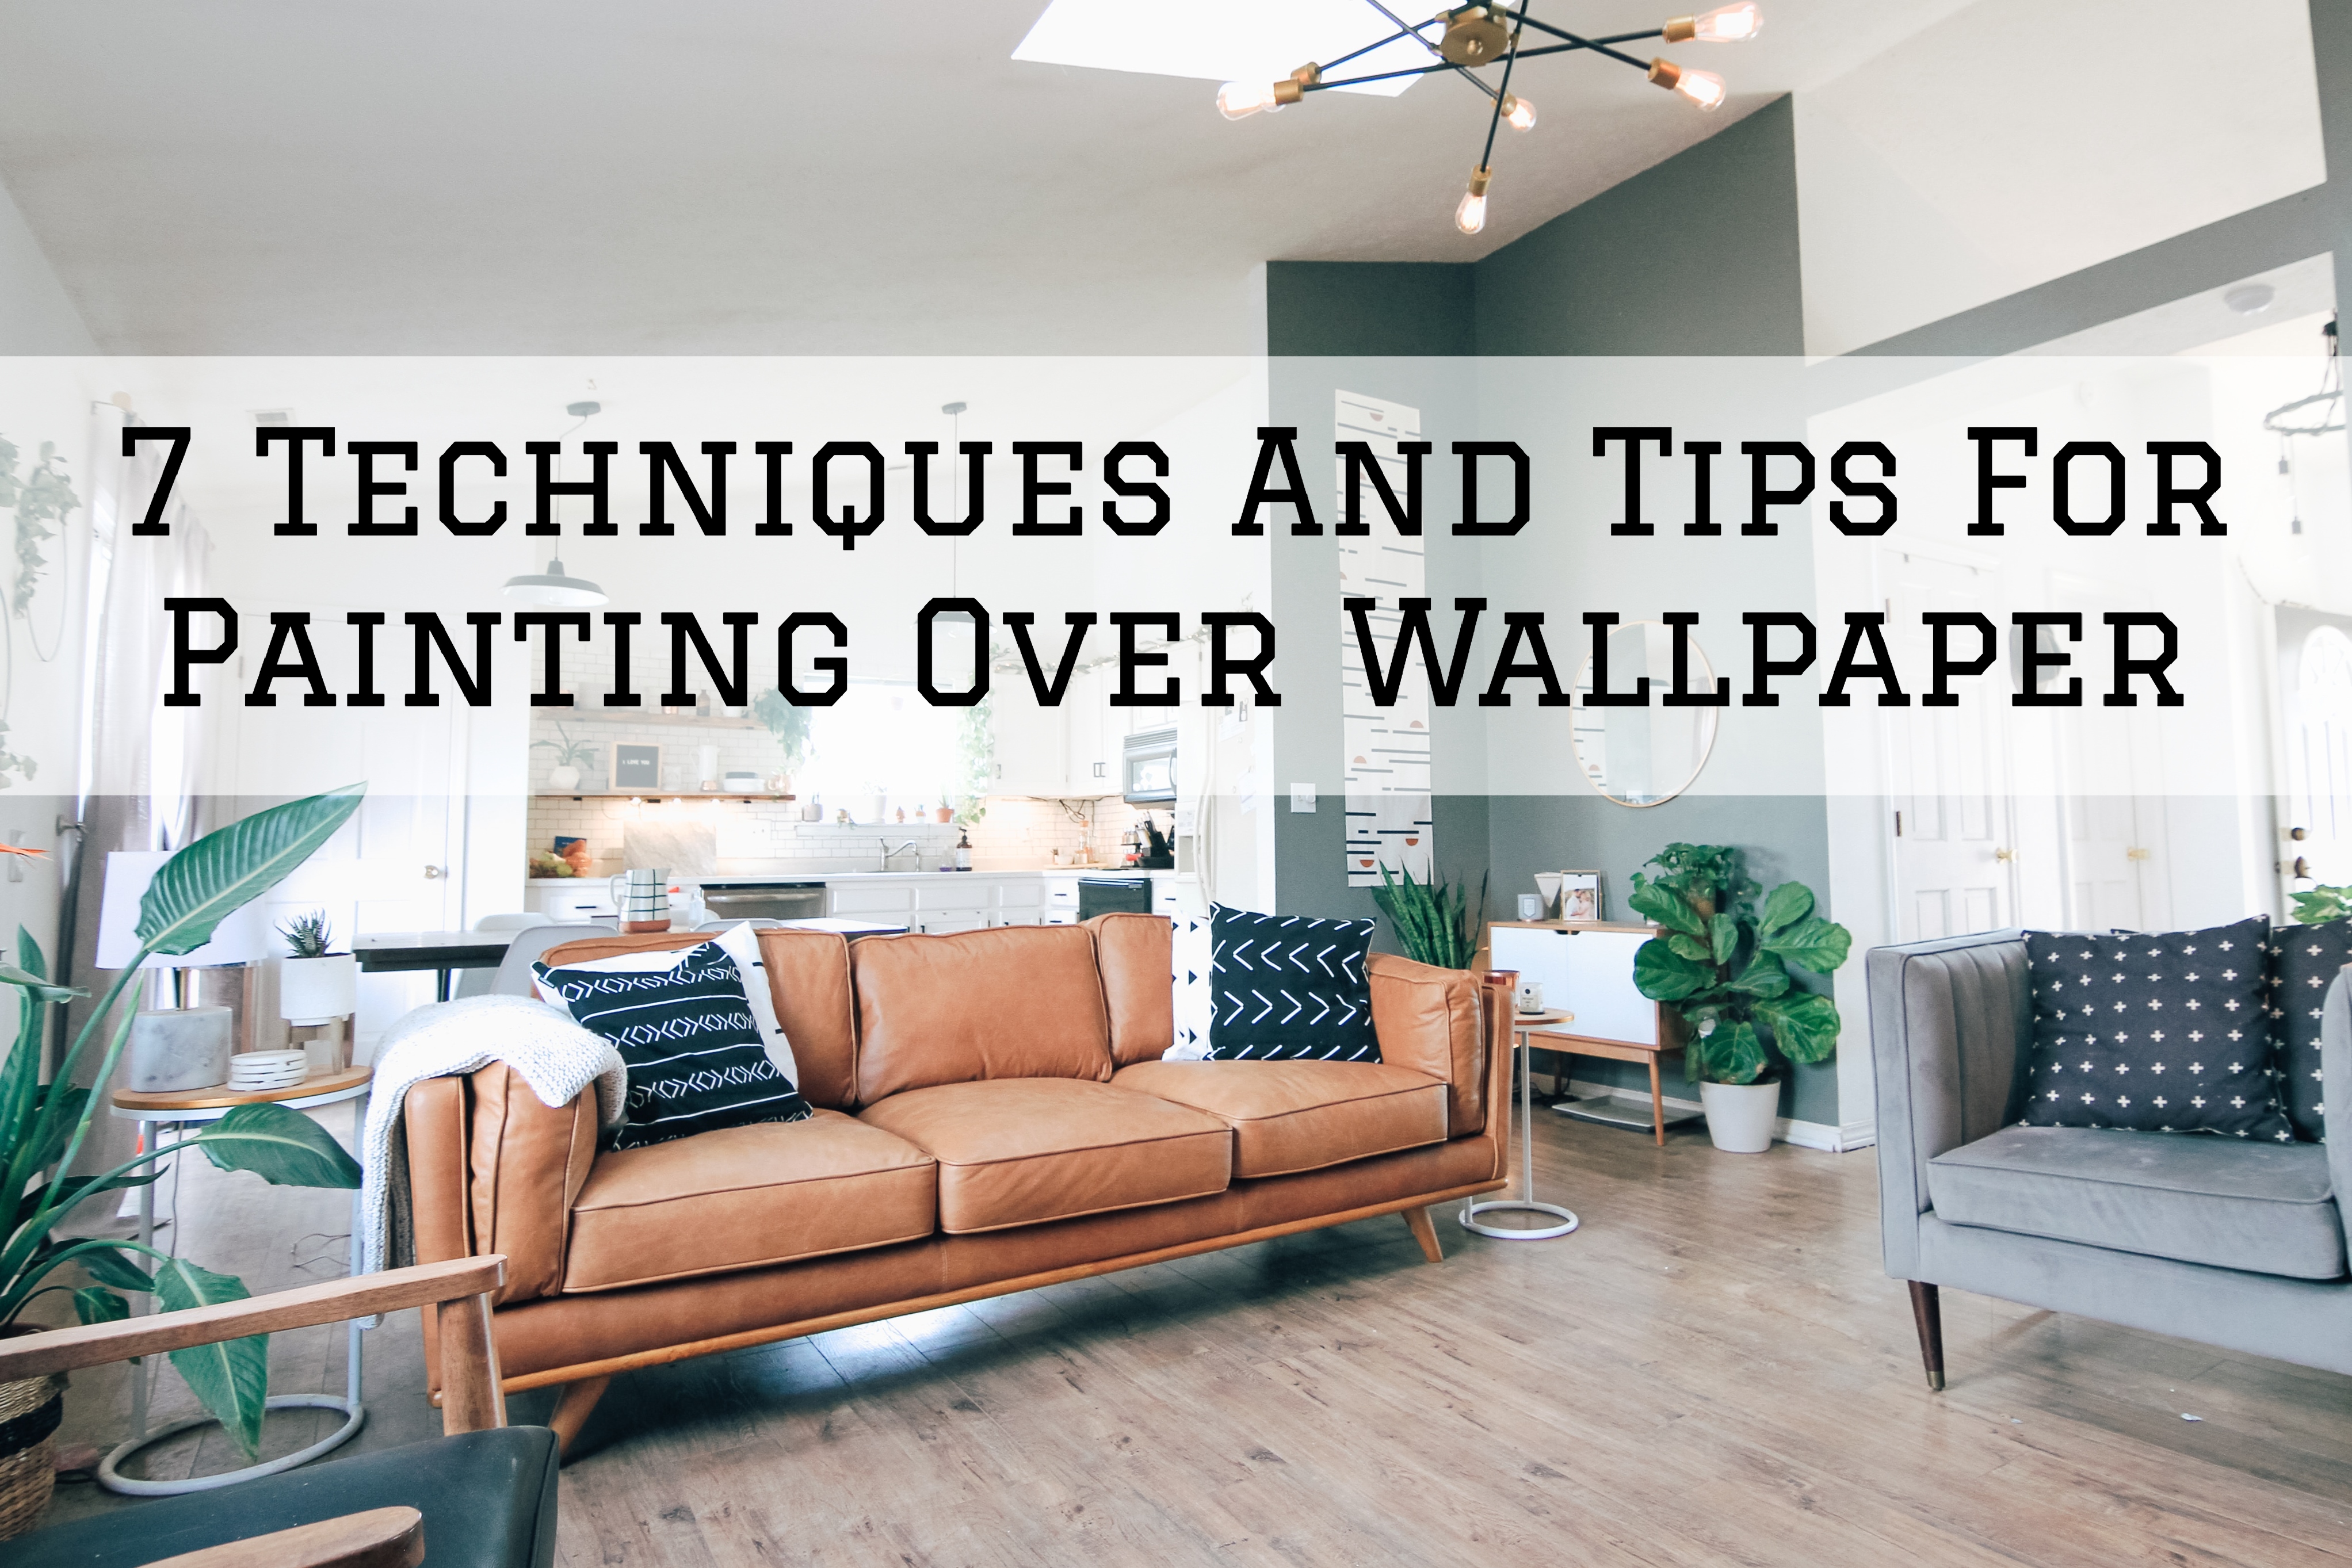 7 Techniques And Tips For Painting Over Wallpaper in Ottawa, Ontario